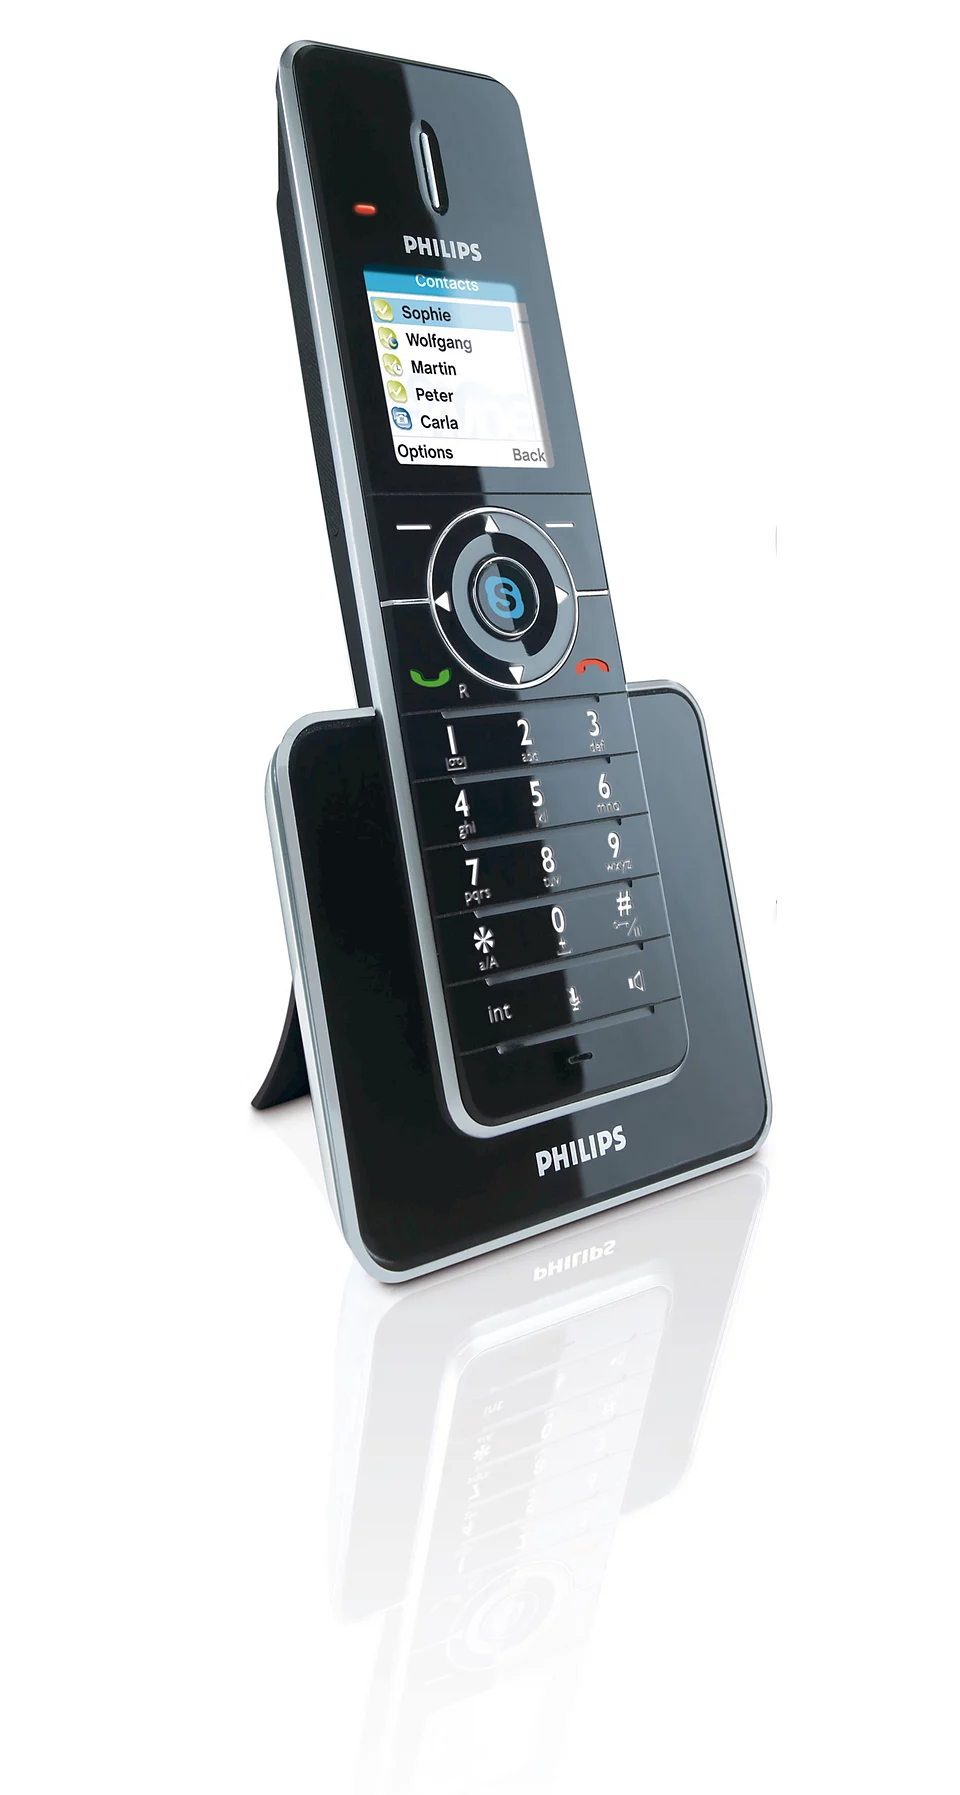 VOIP8551B/26